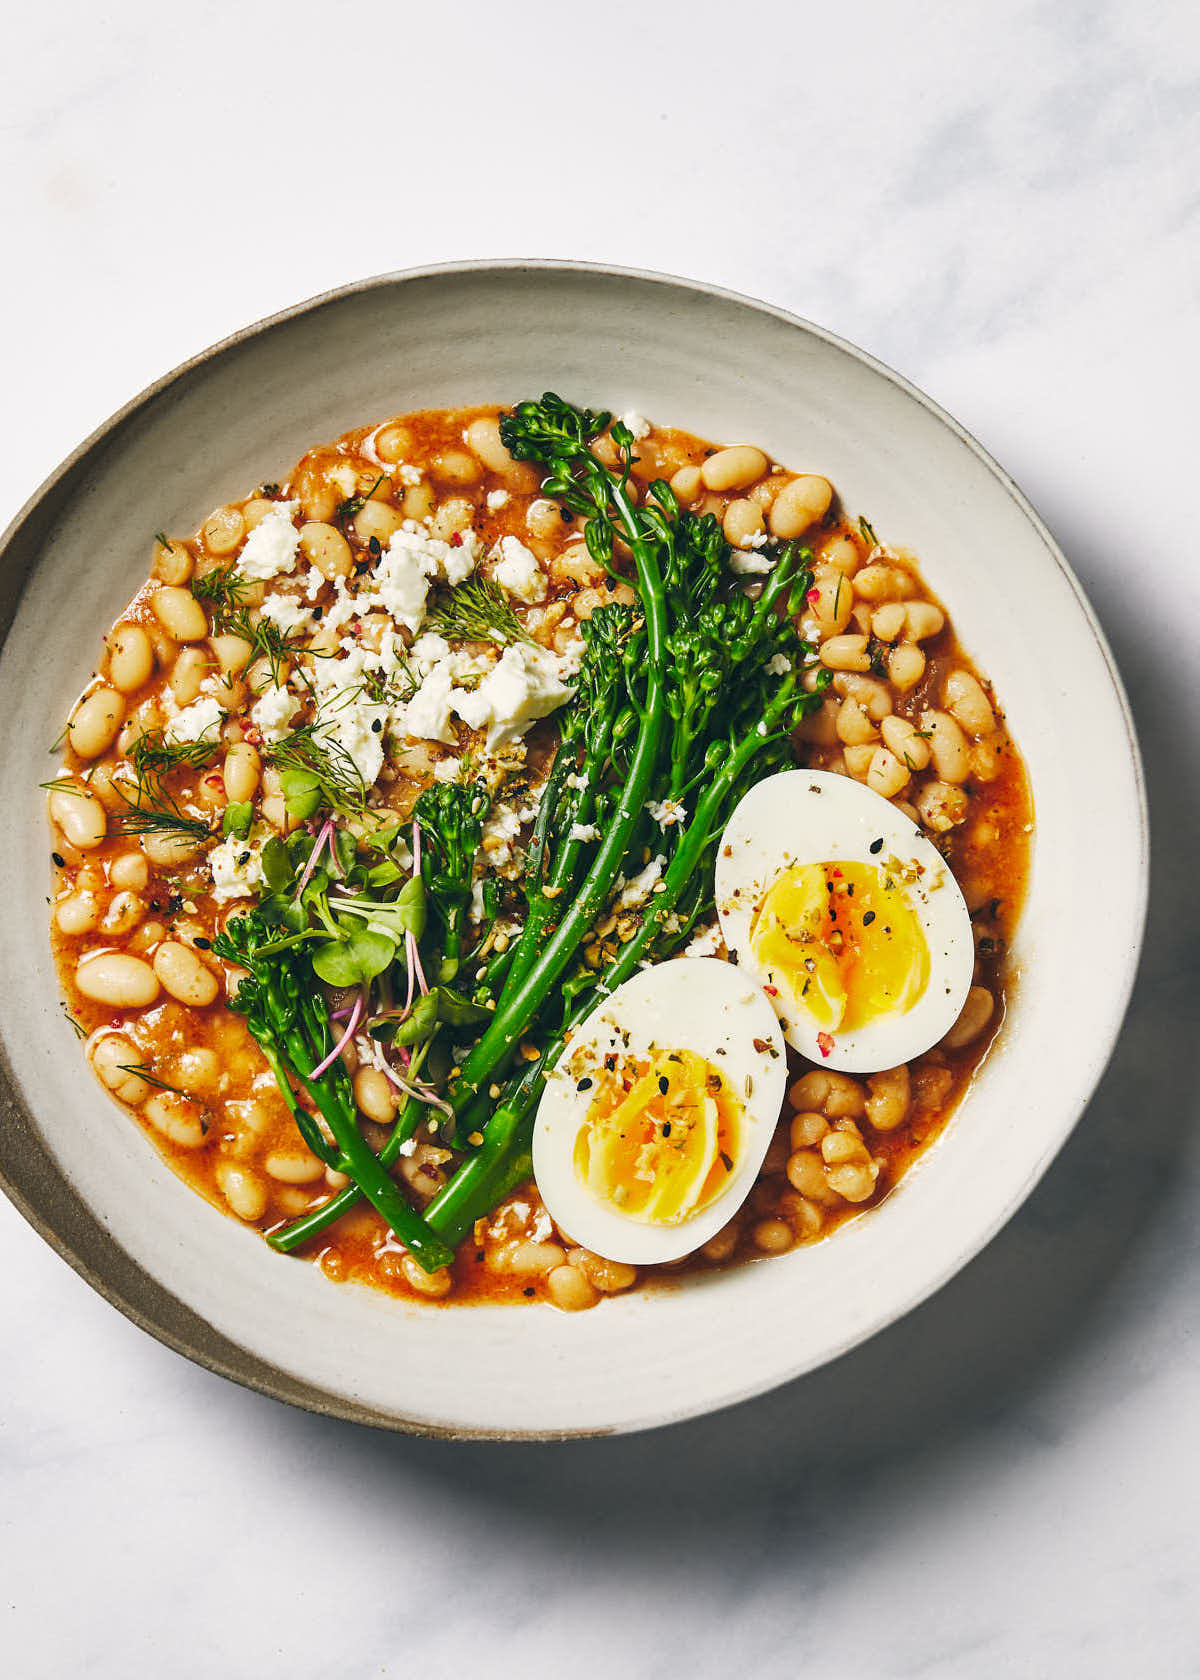 Plate of beans topped with an egg and brocollini